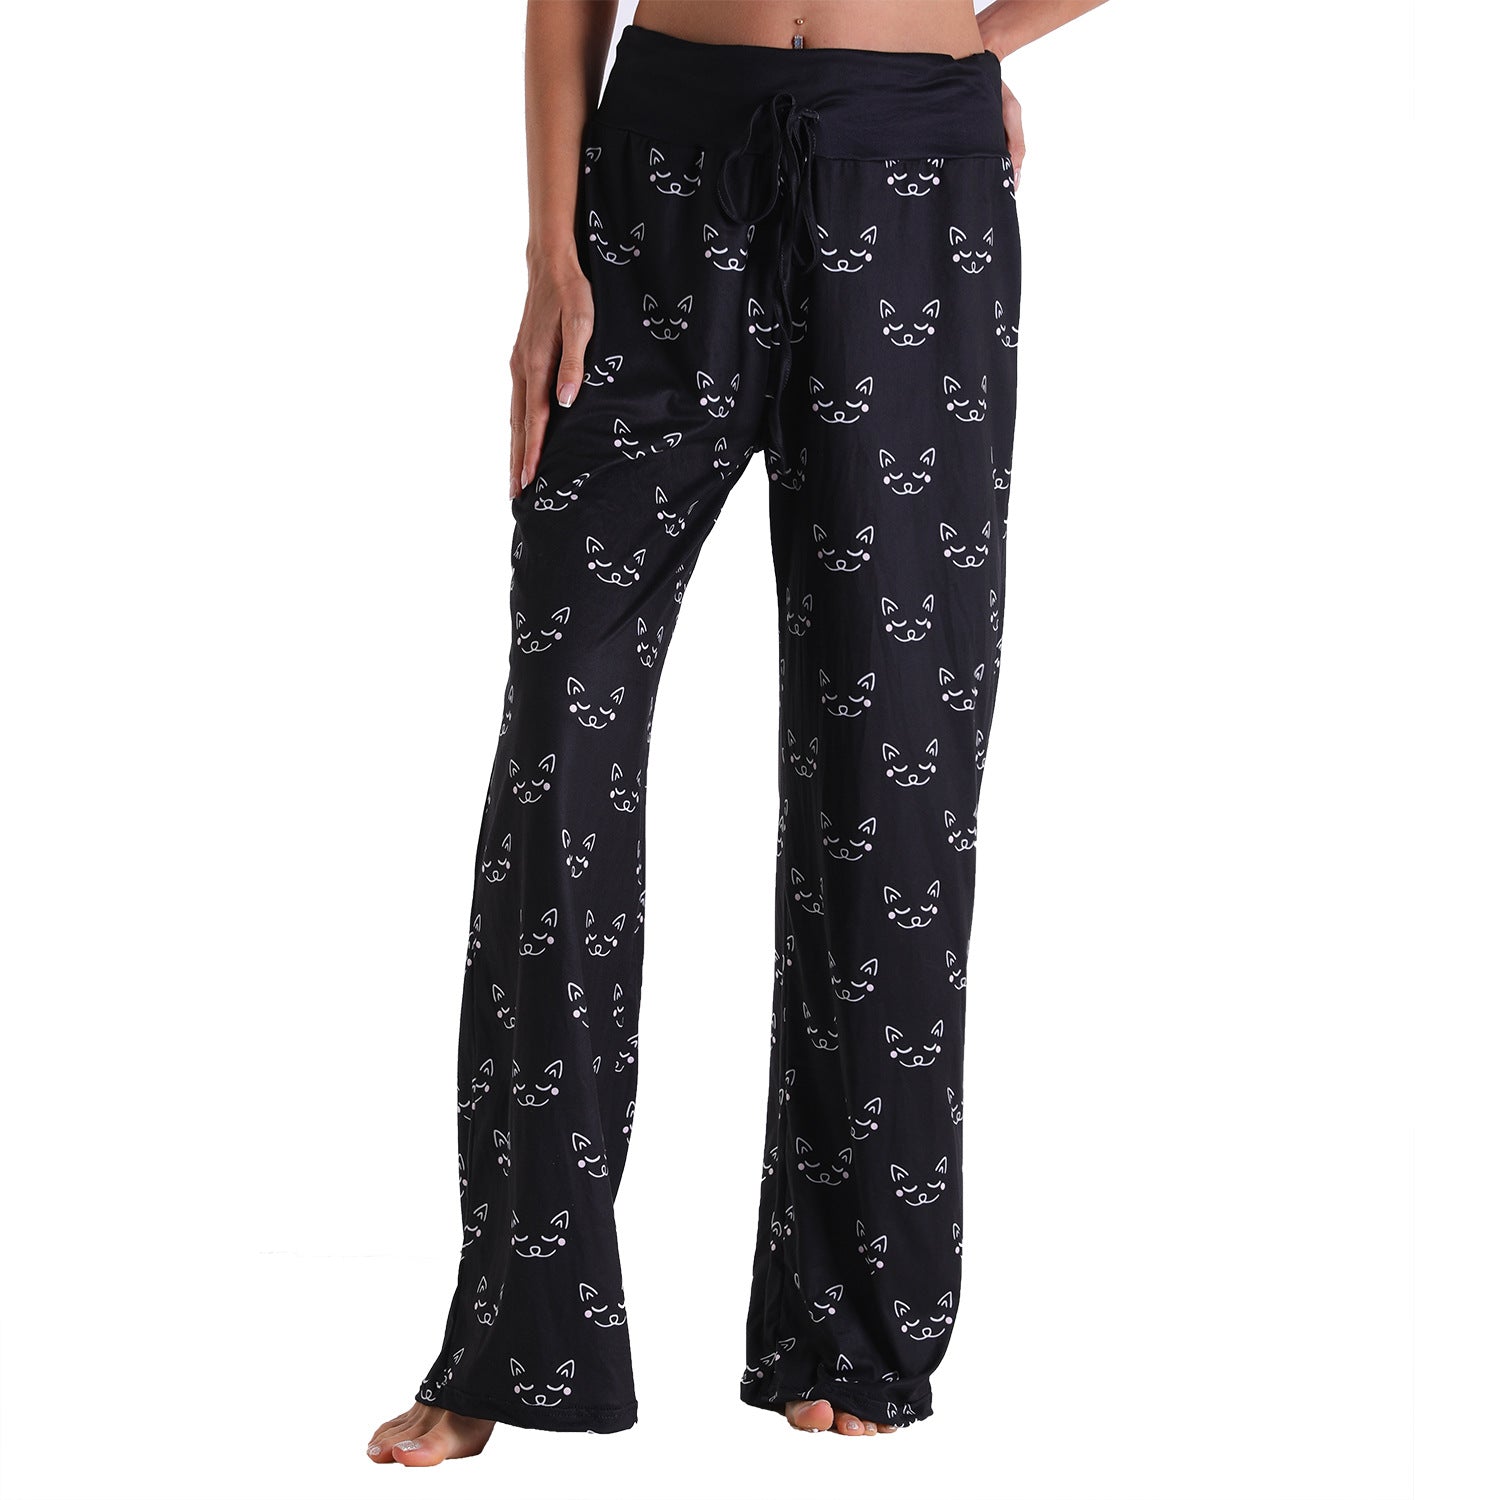 Casual Floral Print Women High Waist Trousers-Pajamas-2014-S-Free Shipping at meselling99